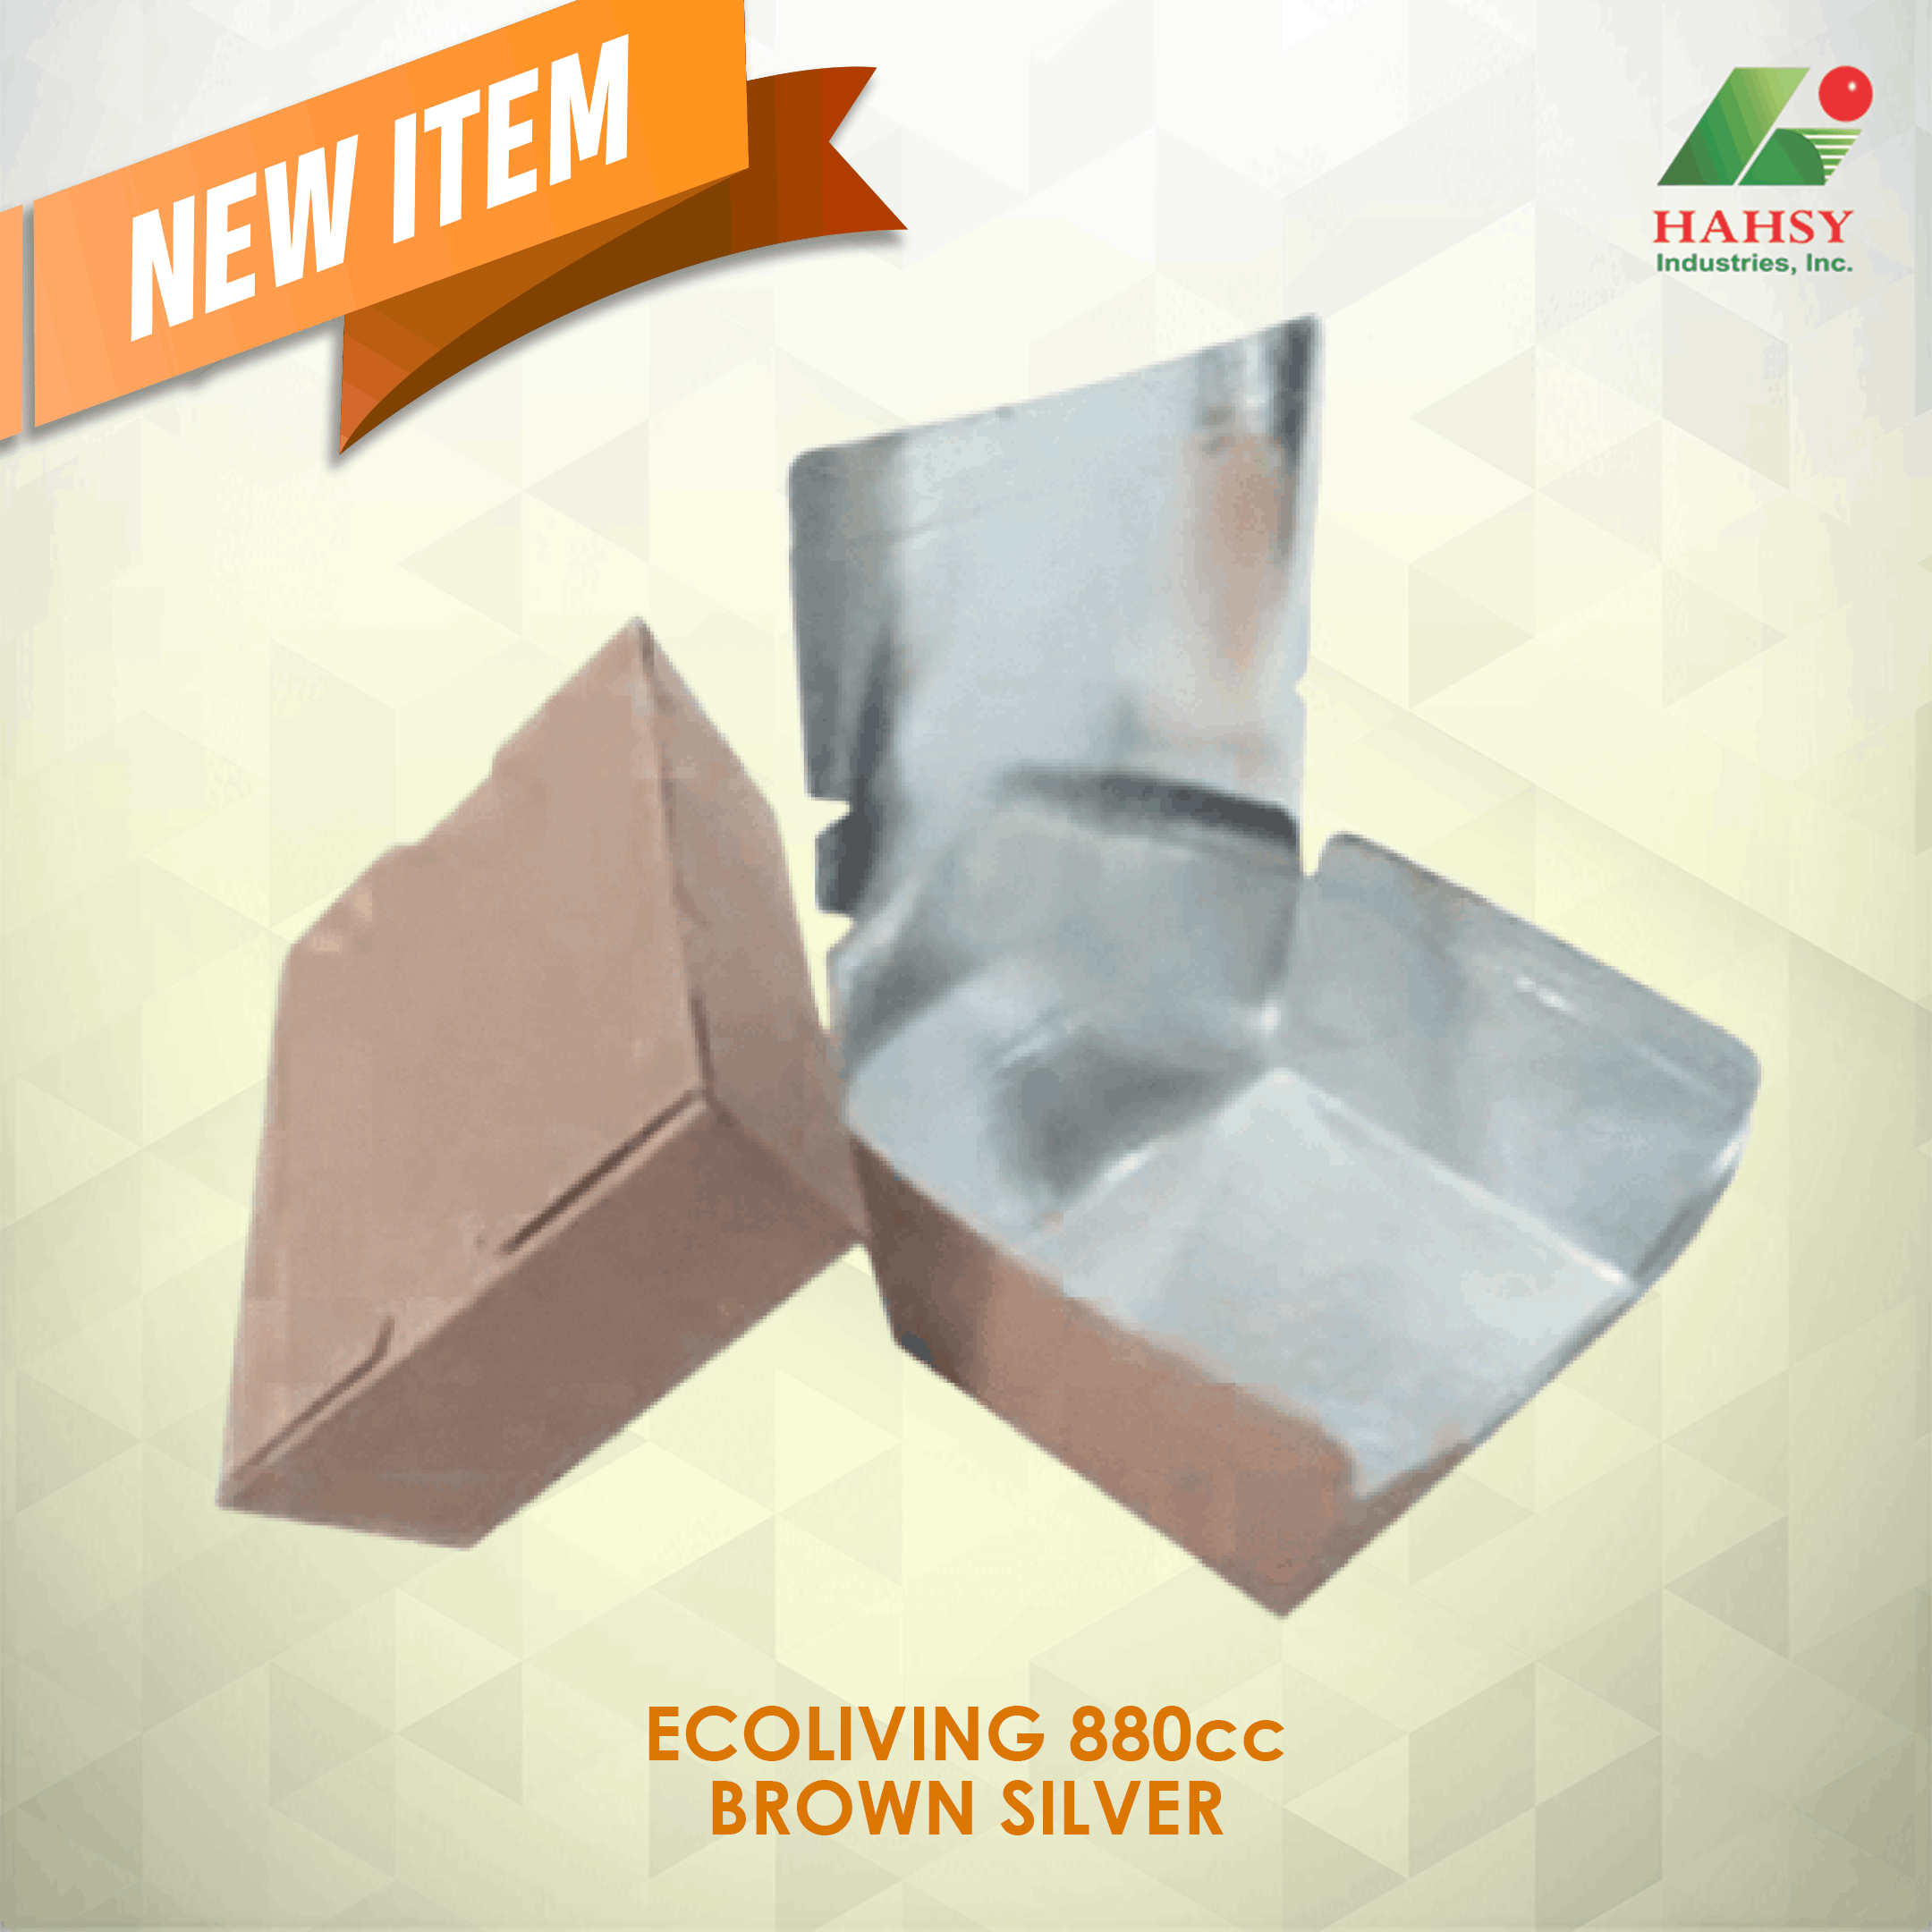 ecoliving 880cc brown silver